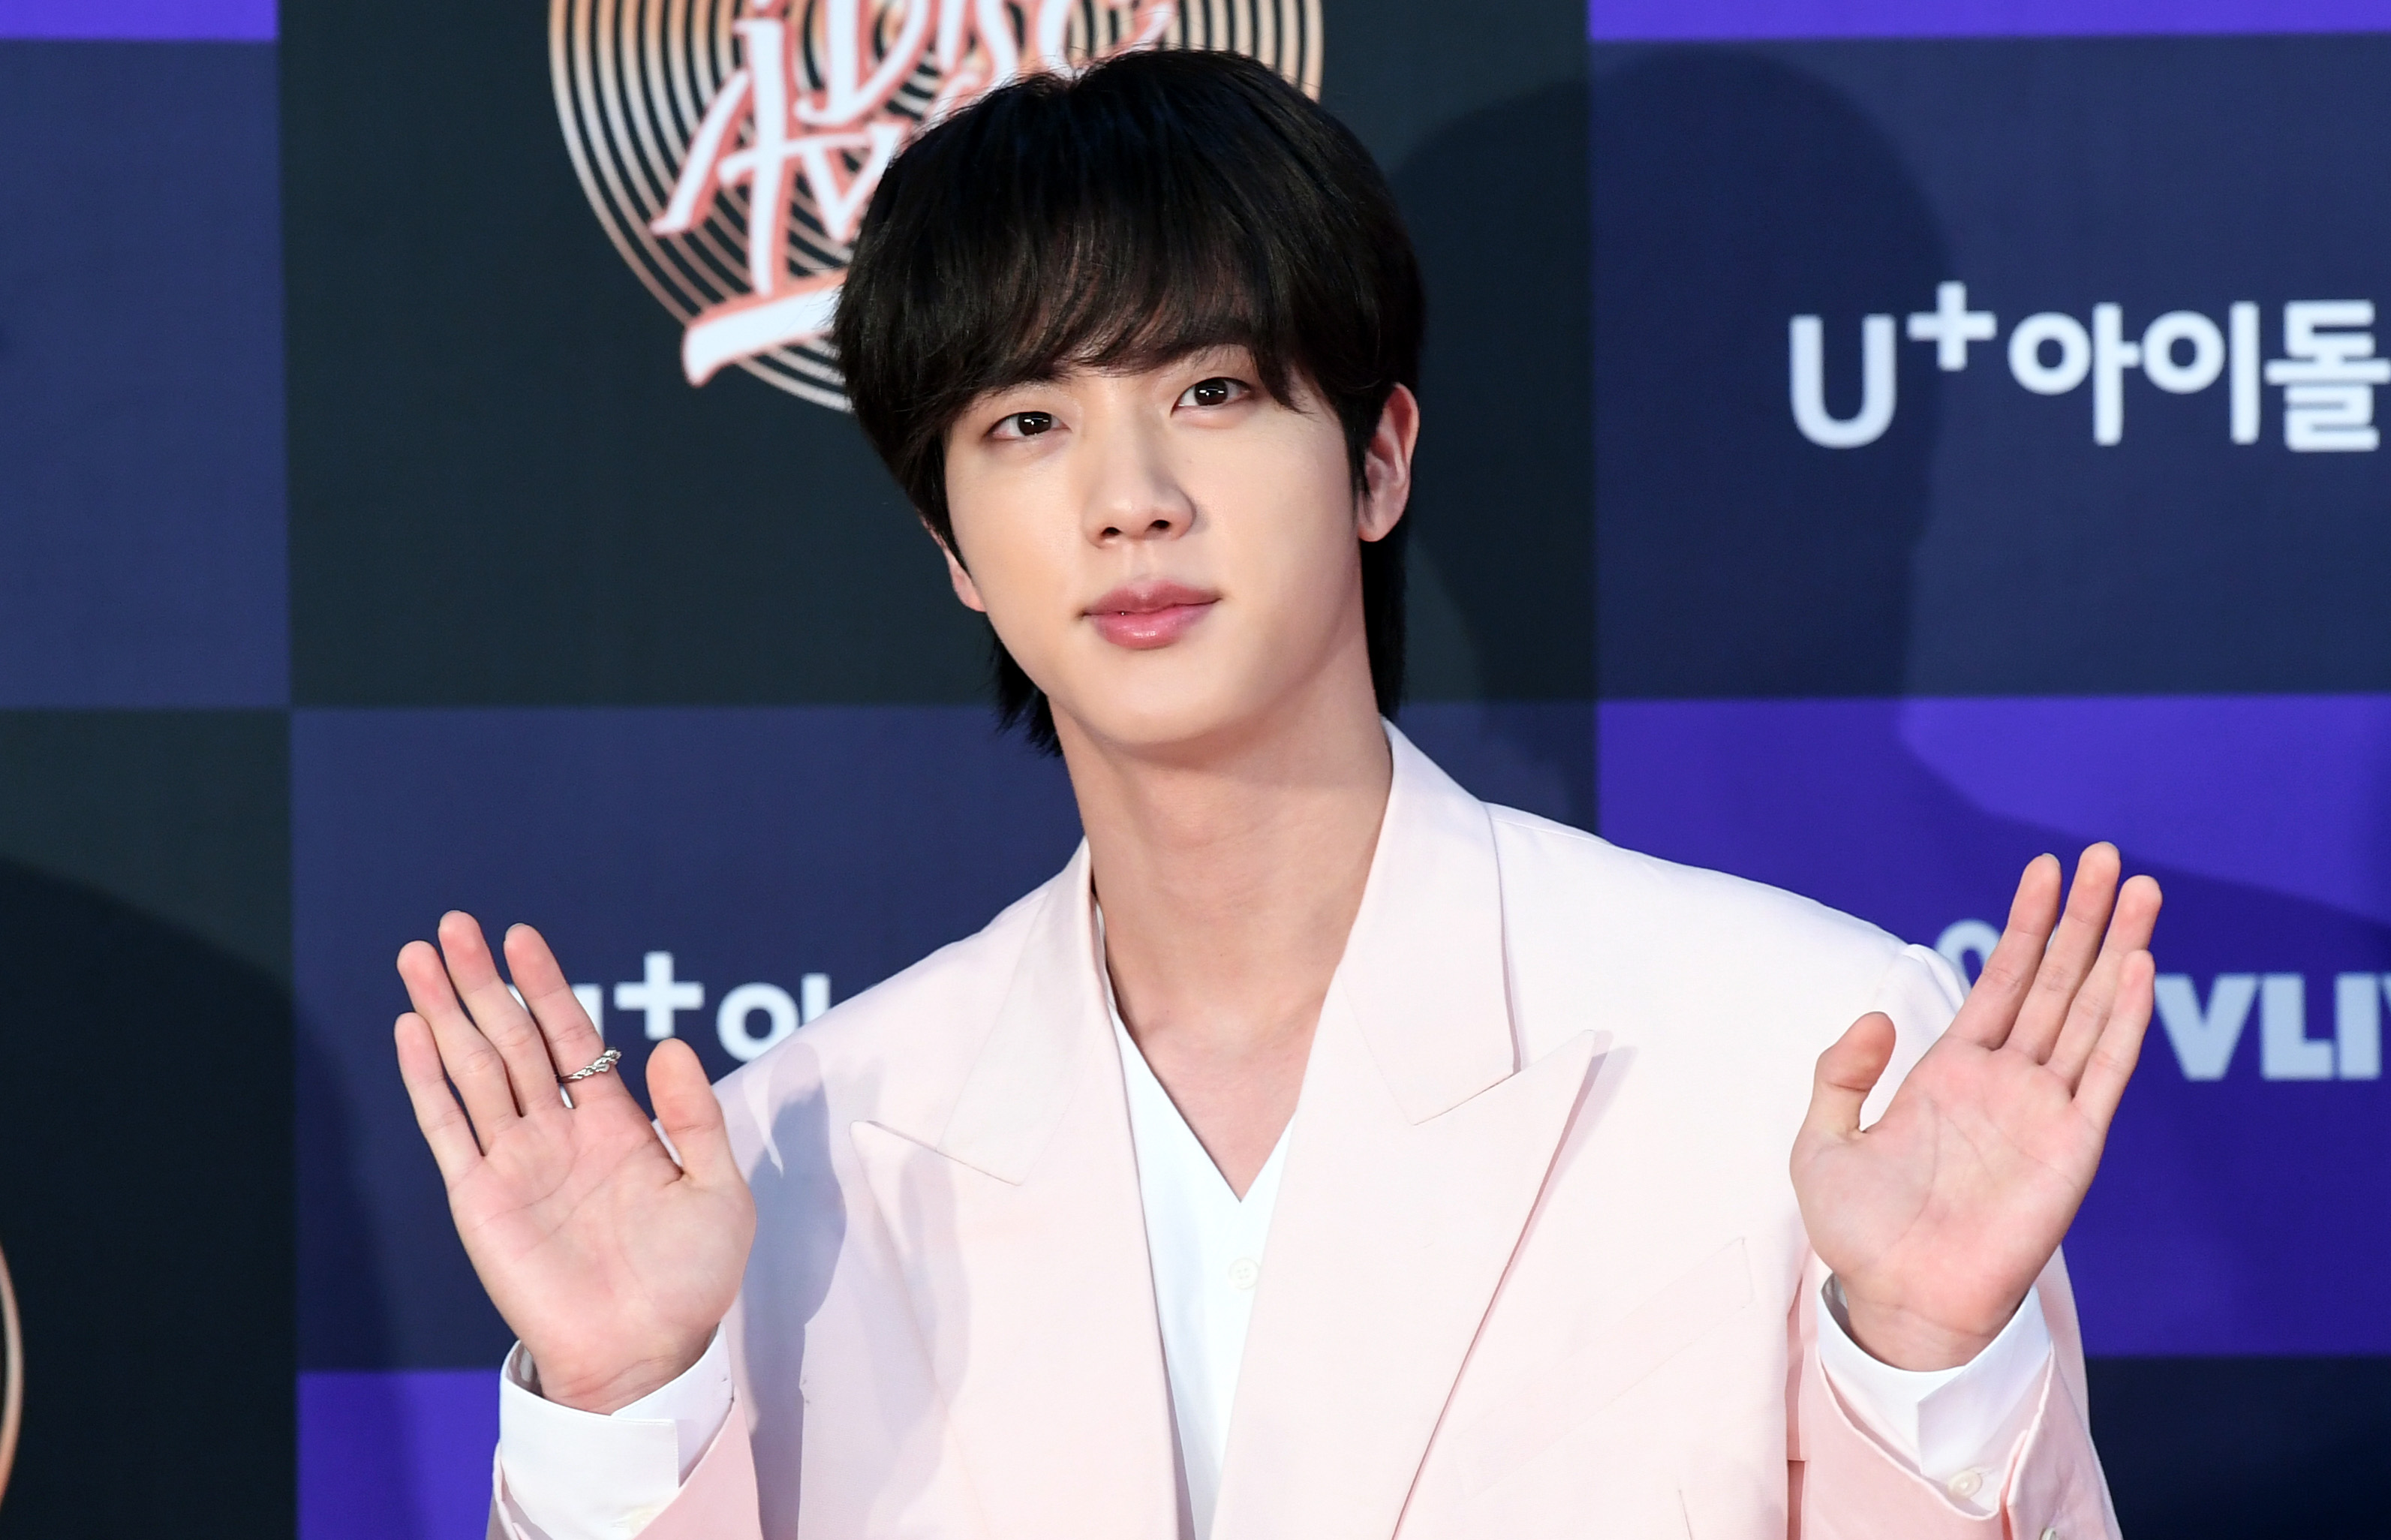 Jin of BTS arrives at the photo call for the 34th Golden Disc Awards